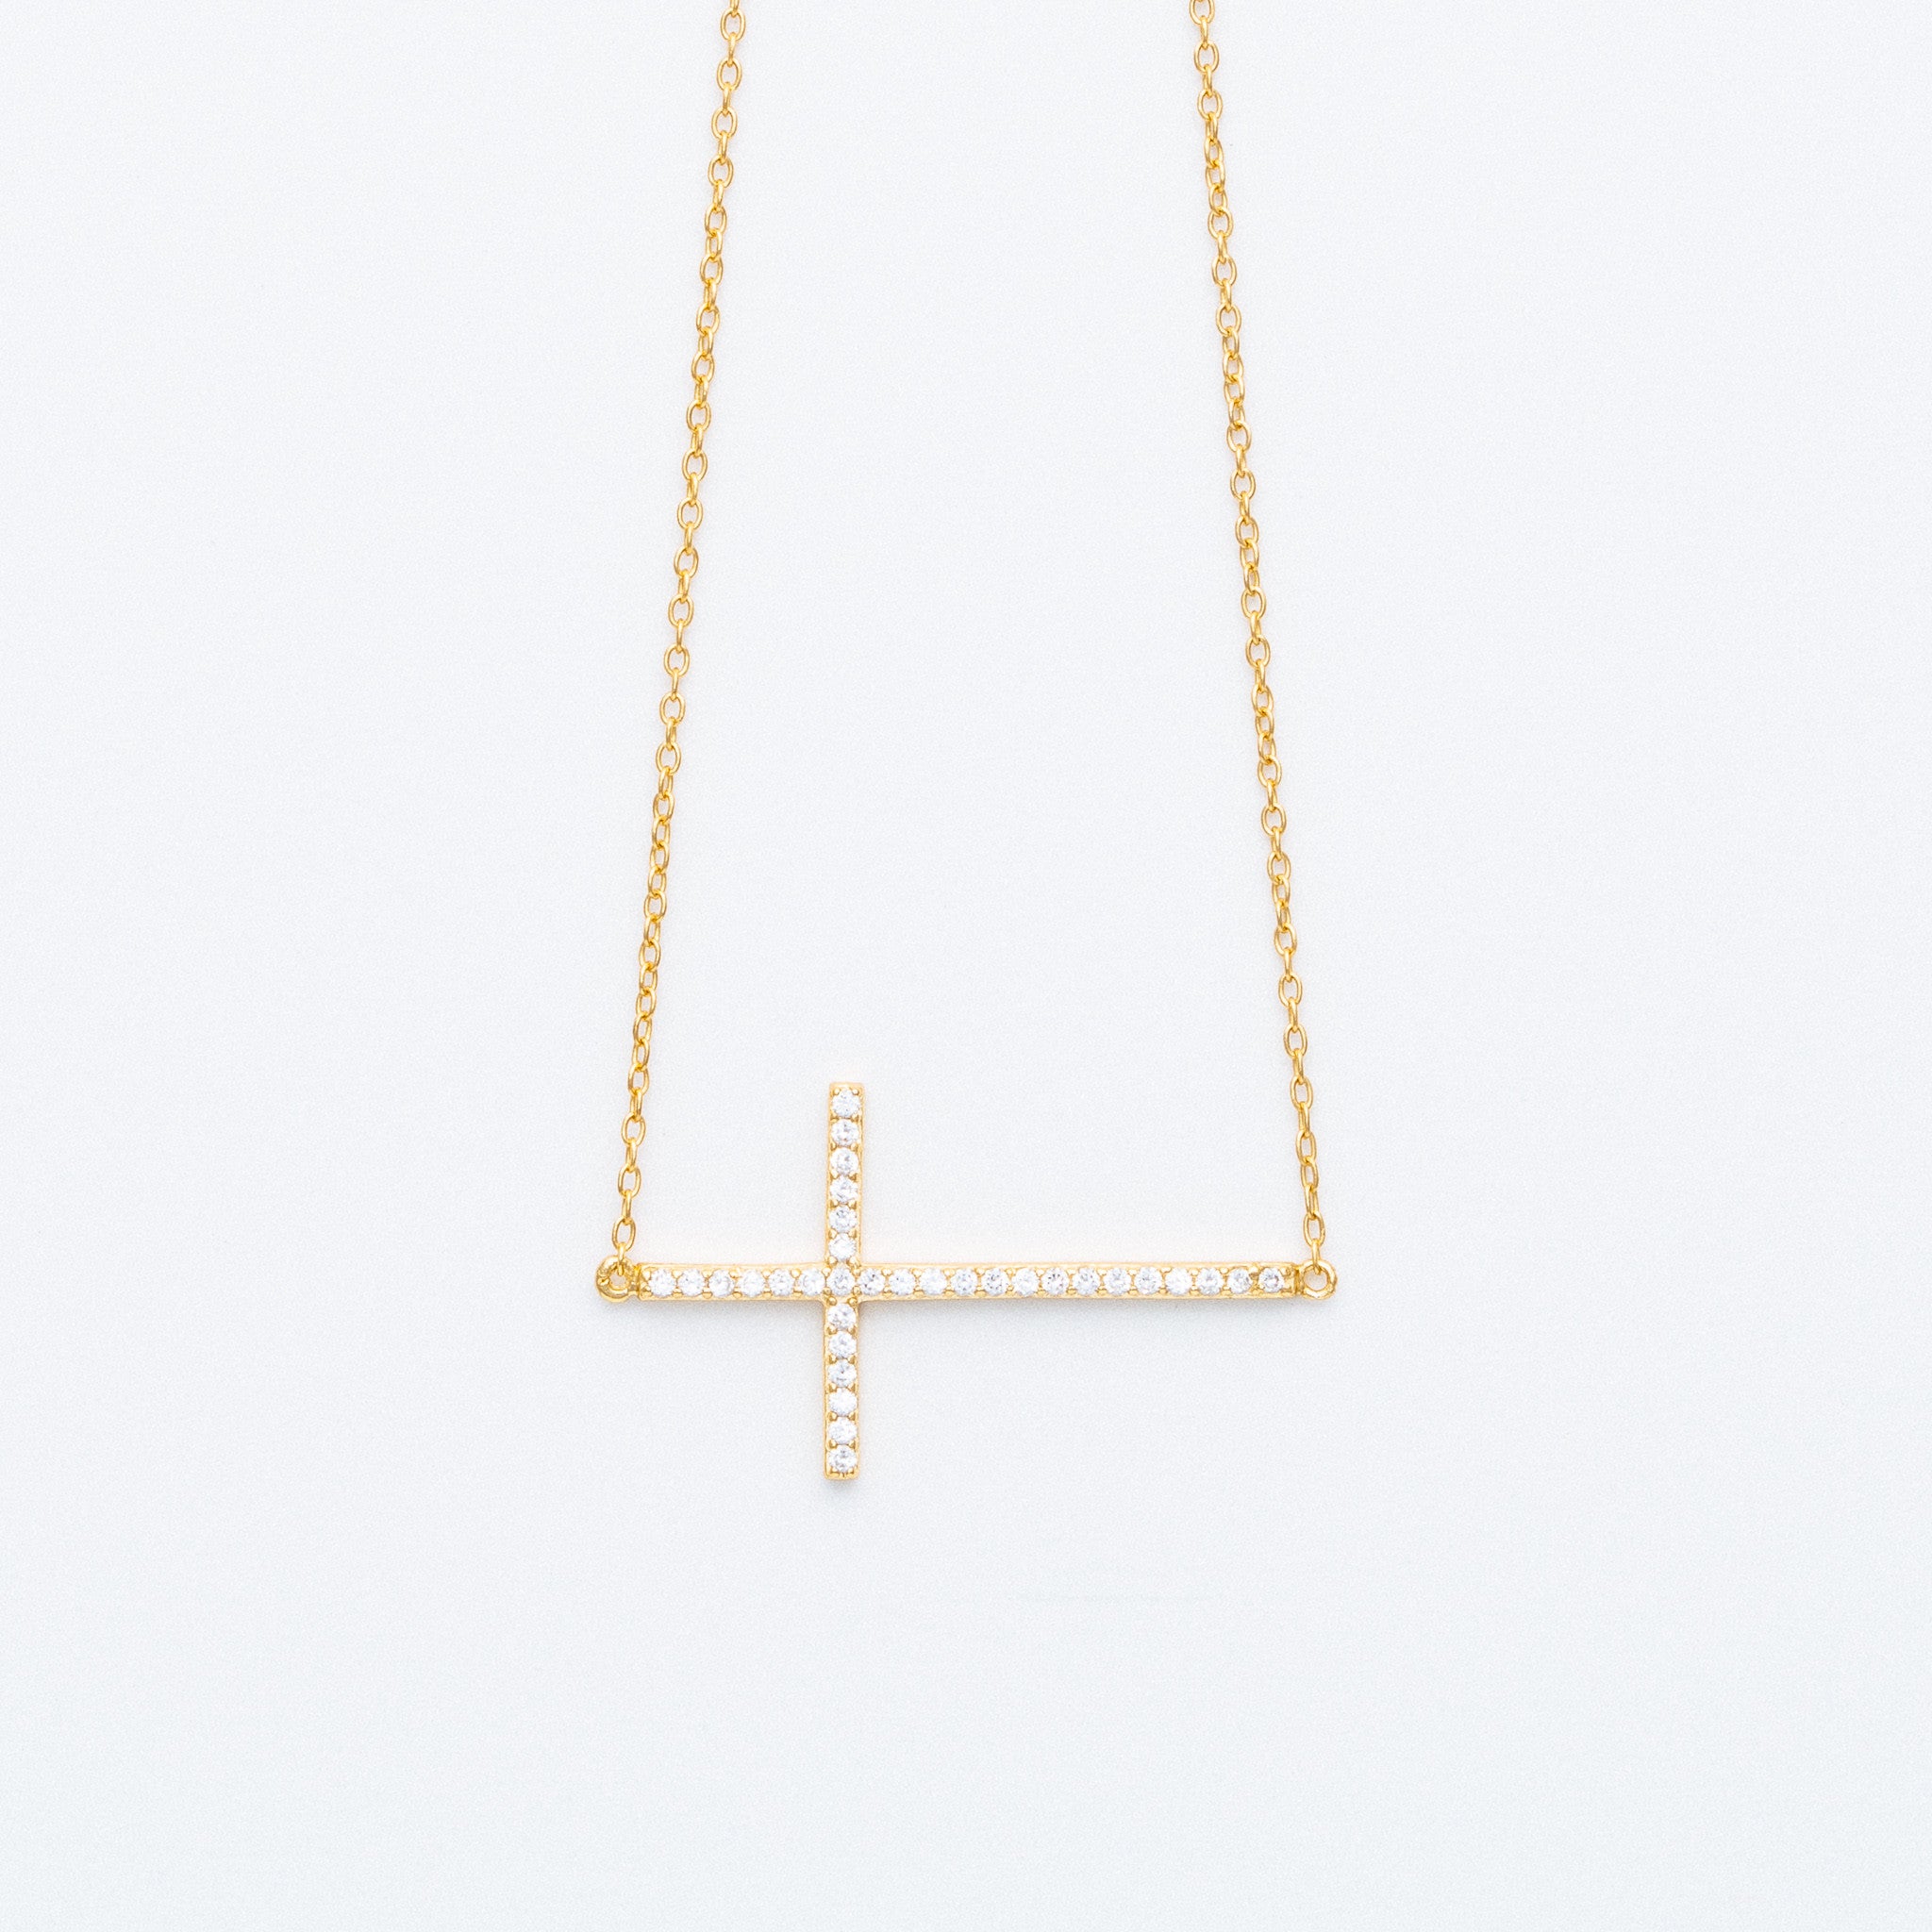 Buy Soumi's Collection Gold plated Christian Cross Necklace at Amazon.in